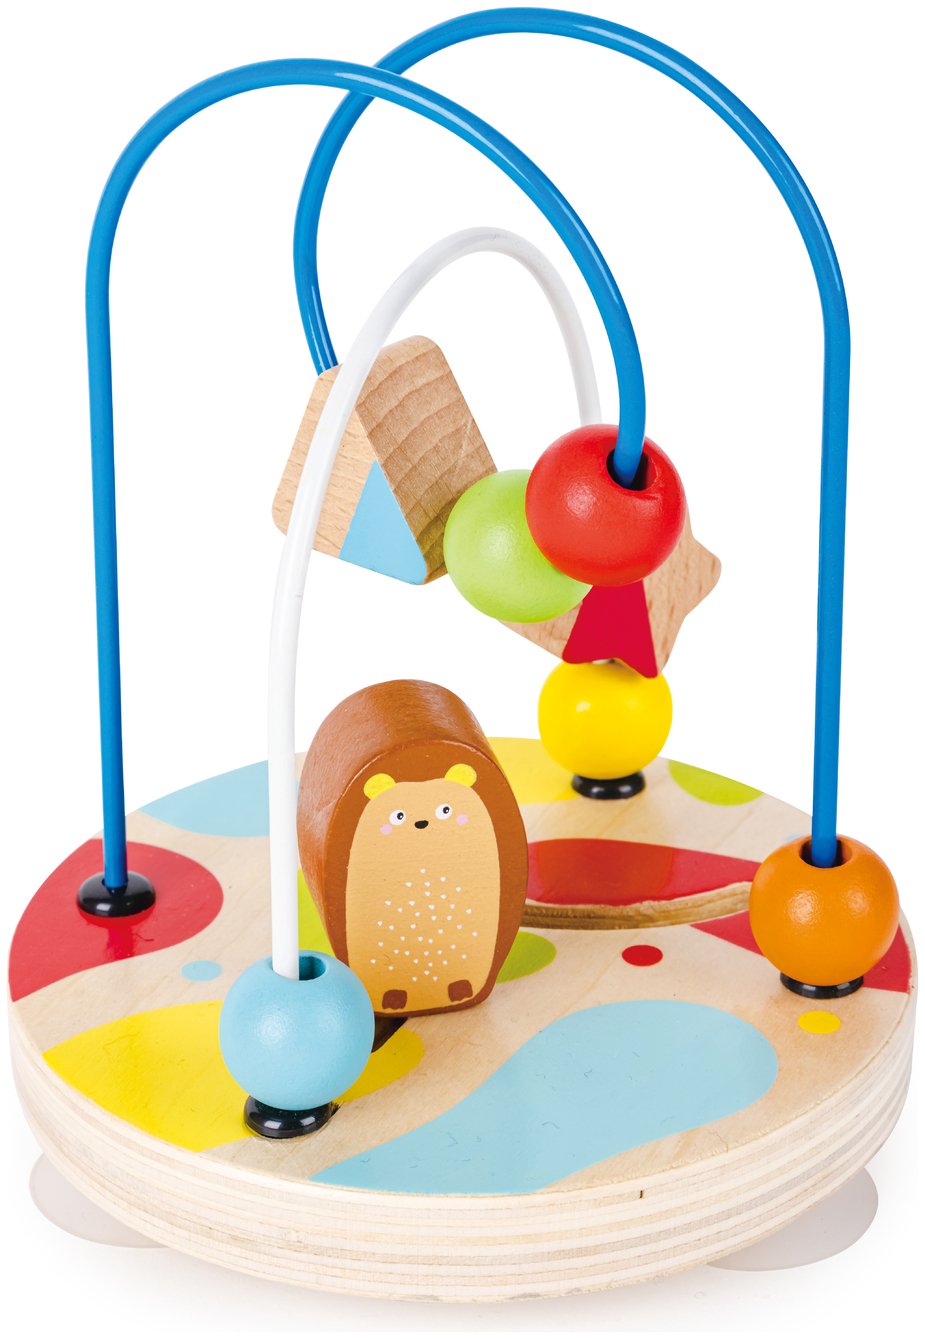 Chad Valley Beads And Loops Activity Toy